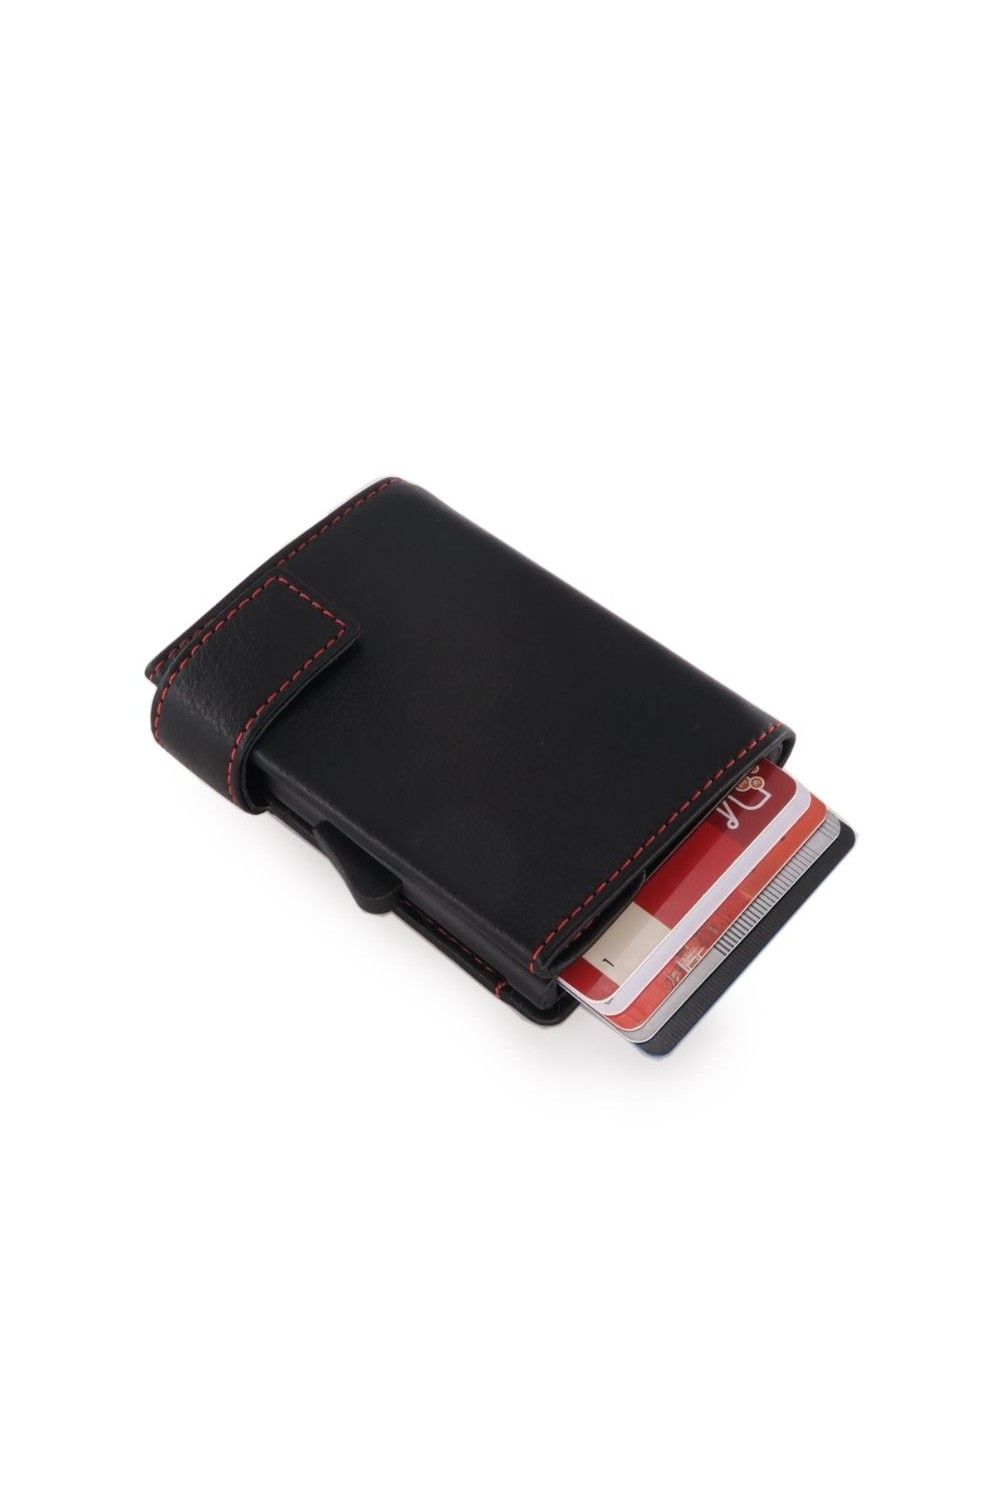 SecWal Card Case RV Leather black-red